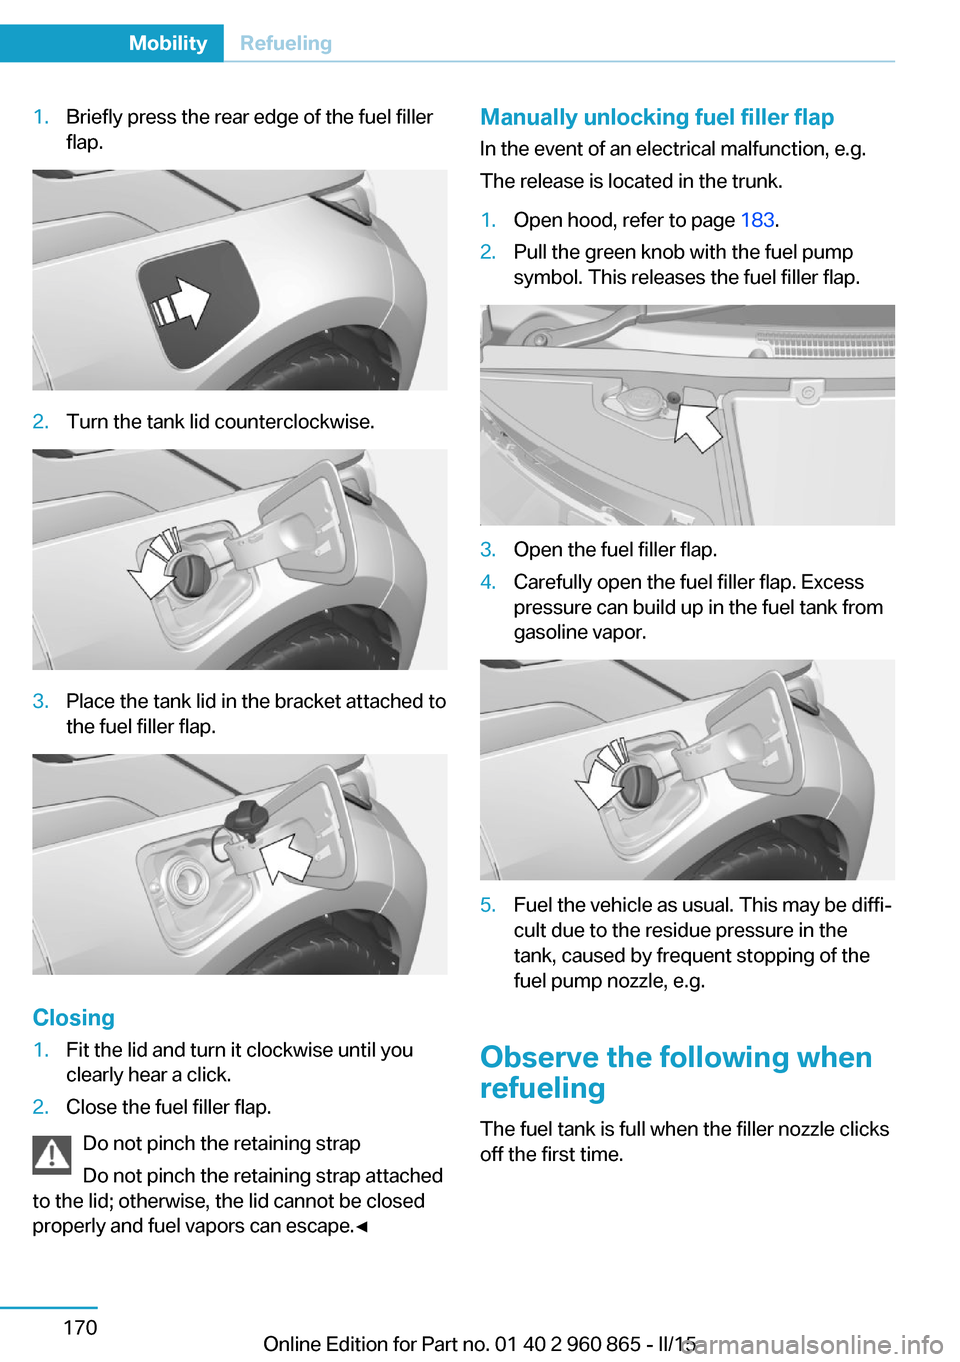 BMW I3 2015 I01 Owners Manual 1.Briefly press the rear edge of the fuel filler
flap.2.Turn the tank lid counterclockwise.3.Place the tank lid in the bracket attached to
the fuel filler flap.
Closing
1.Fit the lid and turn it clock